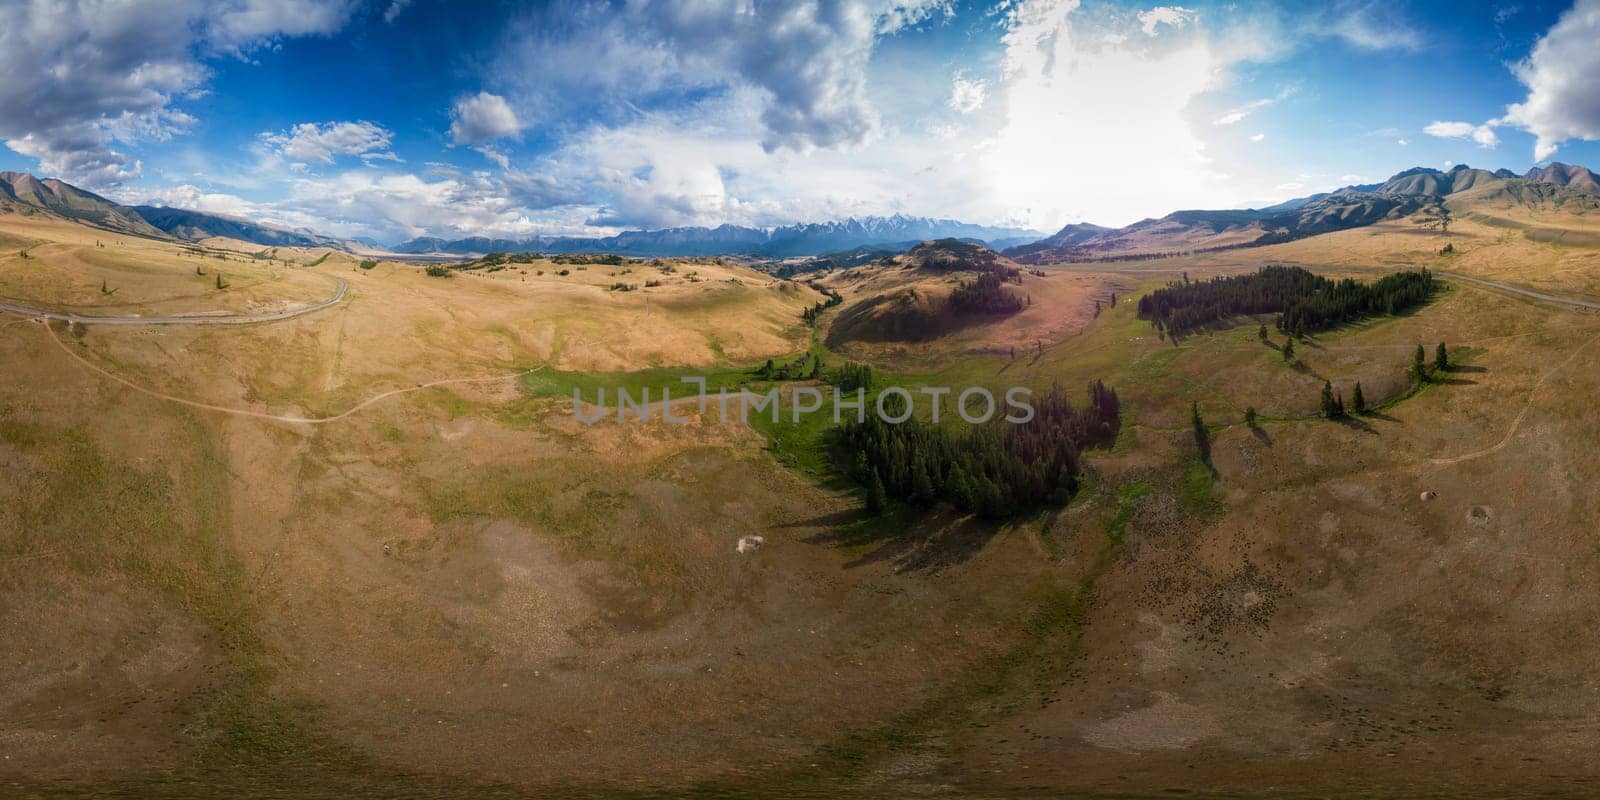 Full 360 equirectangular spherical panorama of mountains in Altay by rusak